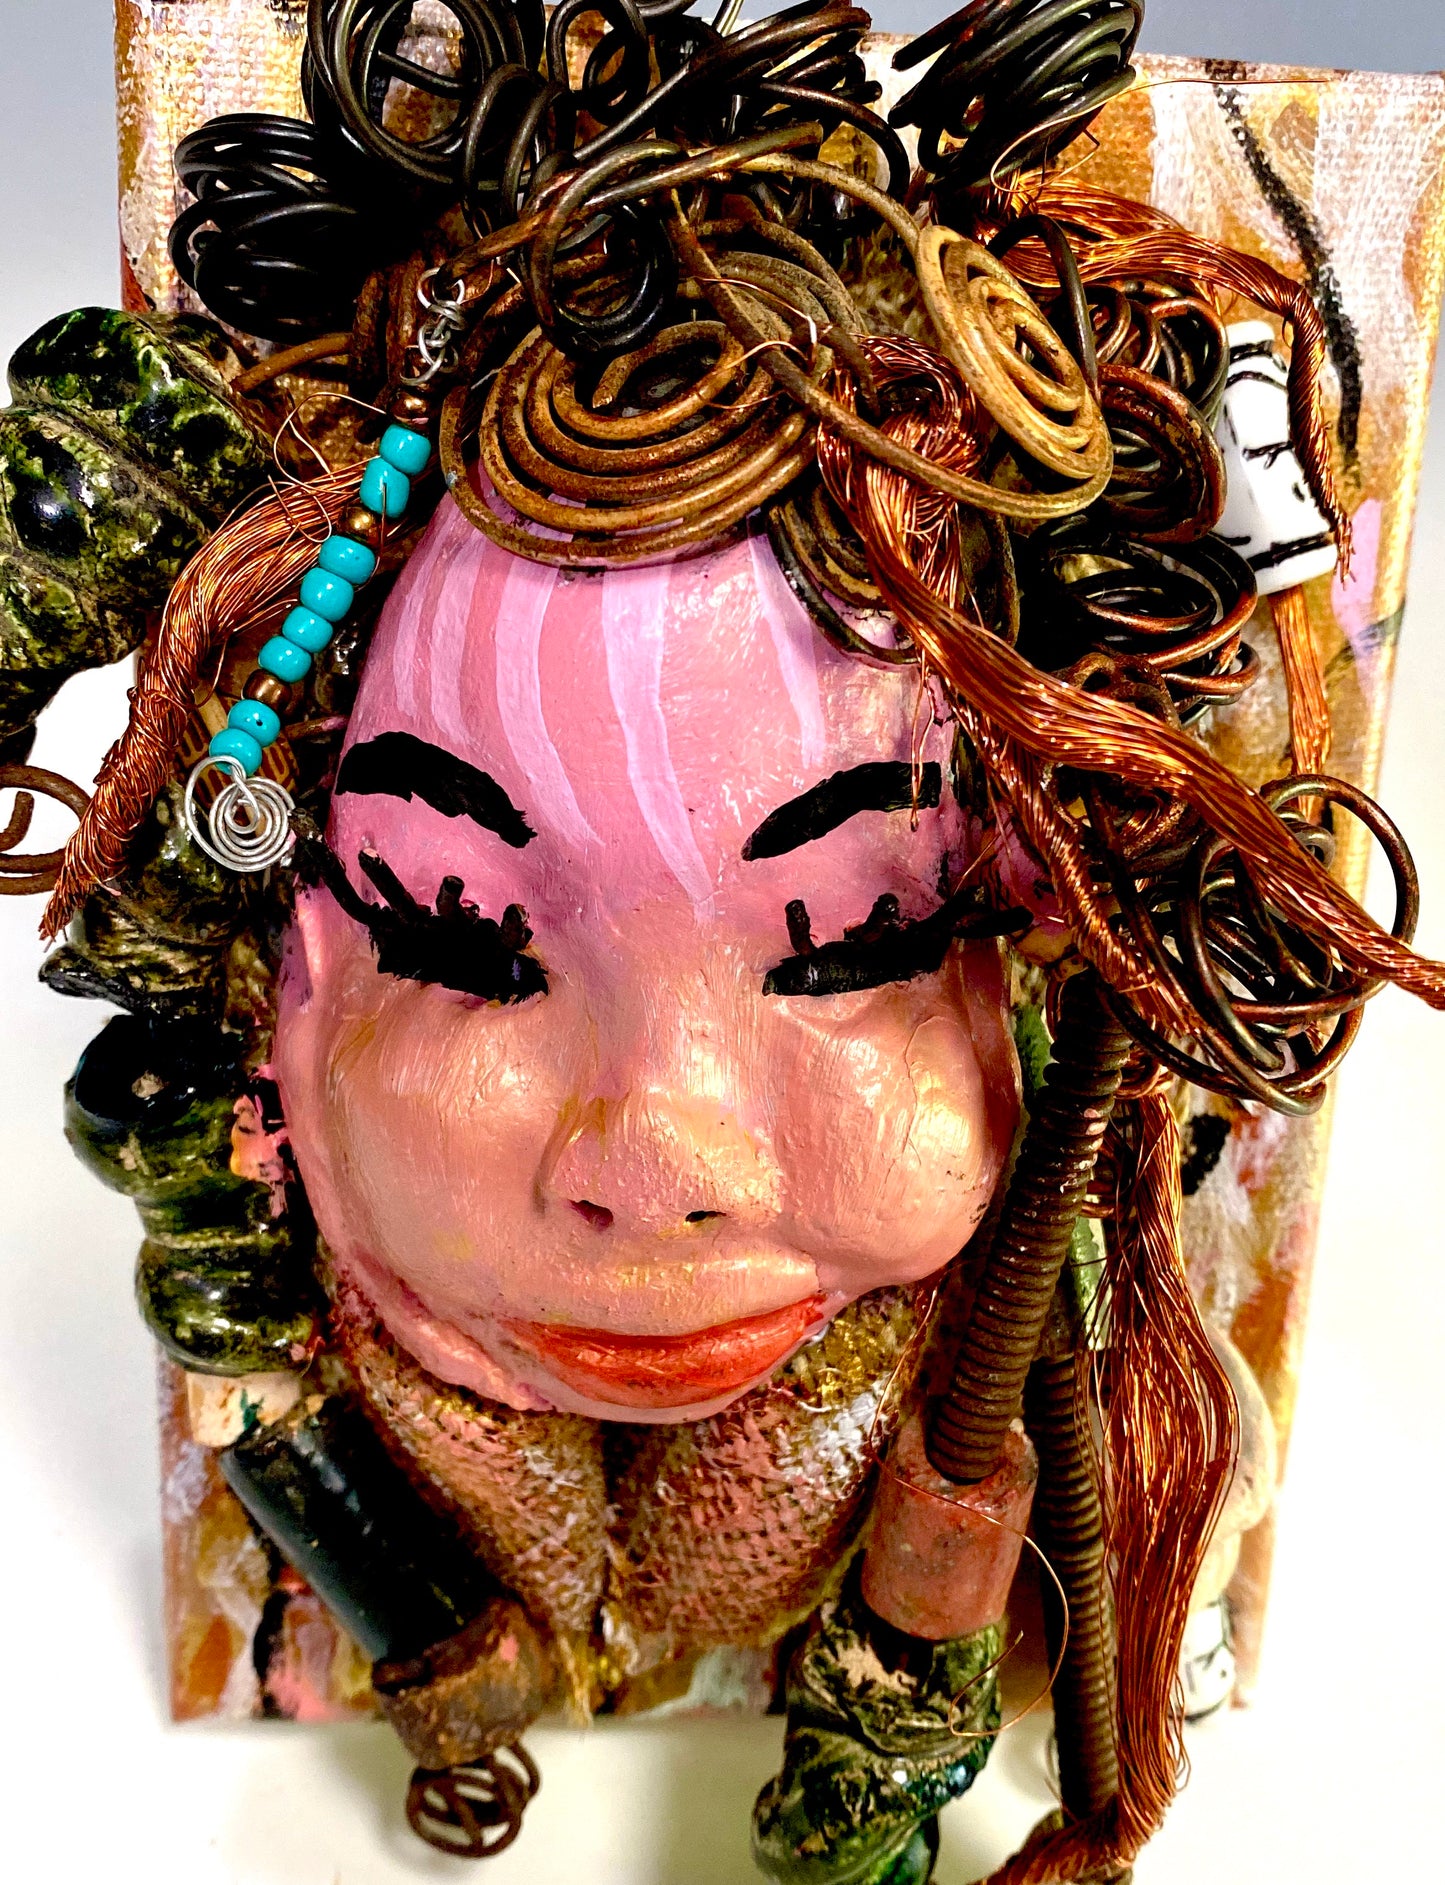 Peggy has a pink and white complexion with ruby red lips! She is mounted on a  5” x 7” and weighs 1.2 lbs. Peggy  has an awesome blue tribal beaded hair dress. She has over 30 feet of coiled 16 gauge wire and copper strands of hair.